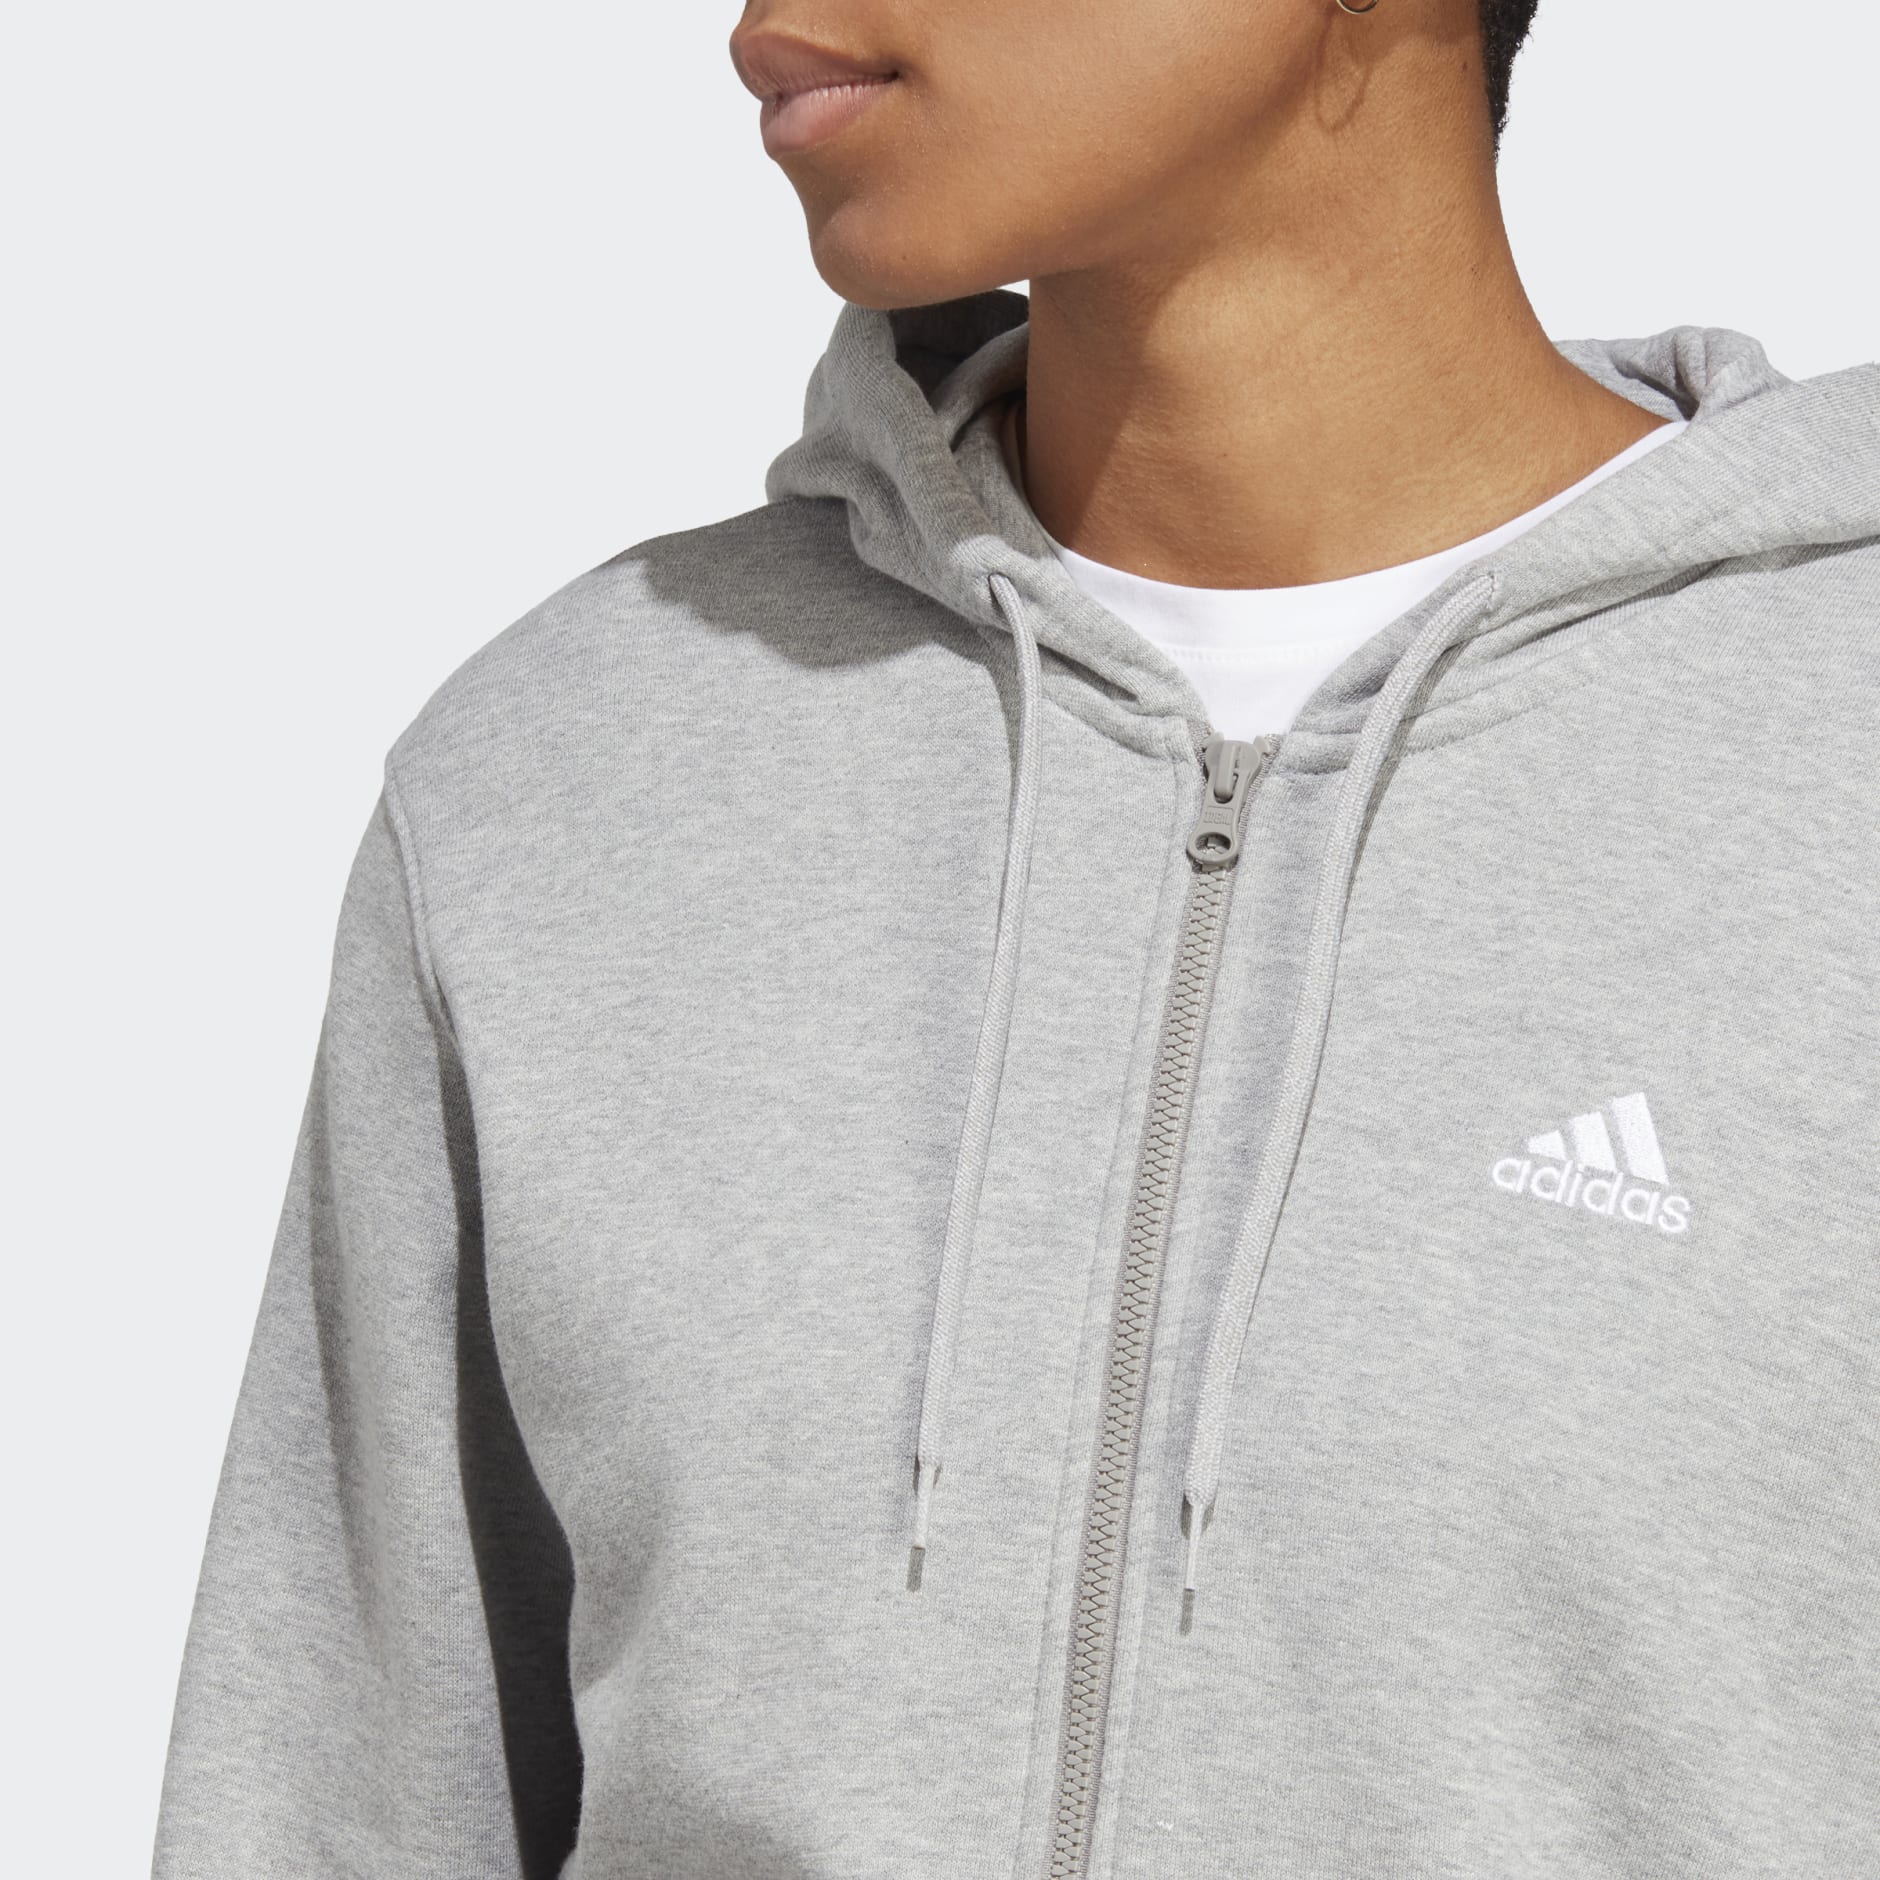 Hoodie Oman French - Terry | adidas Essentials Linear Full-Zip - Clothing Women\'s Grey